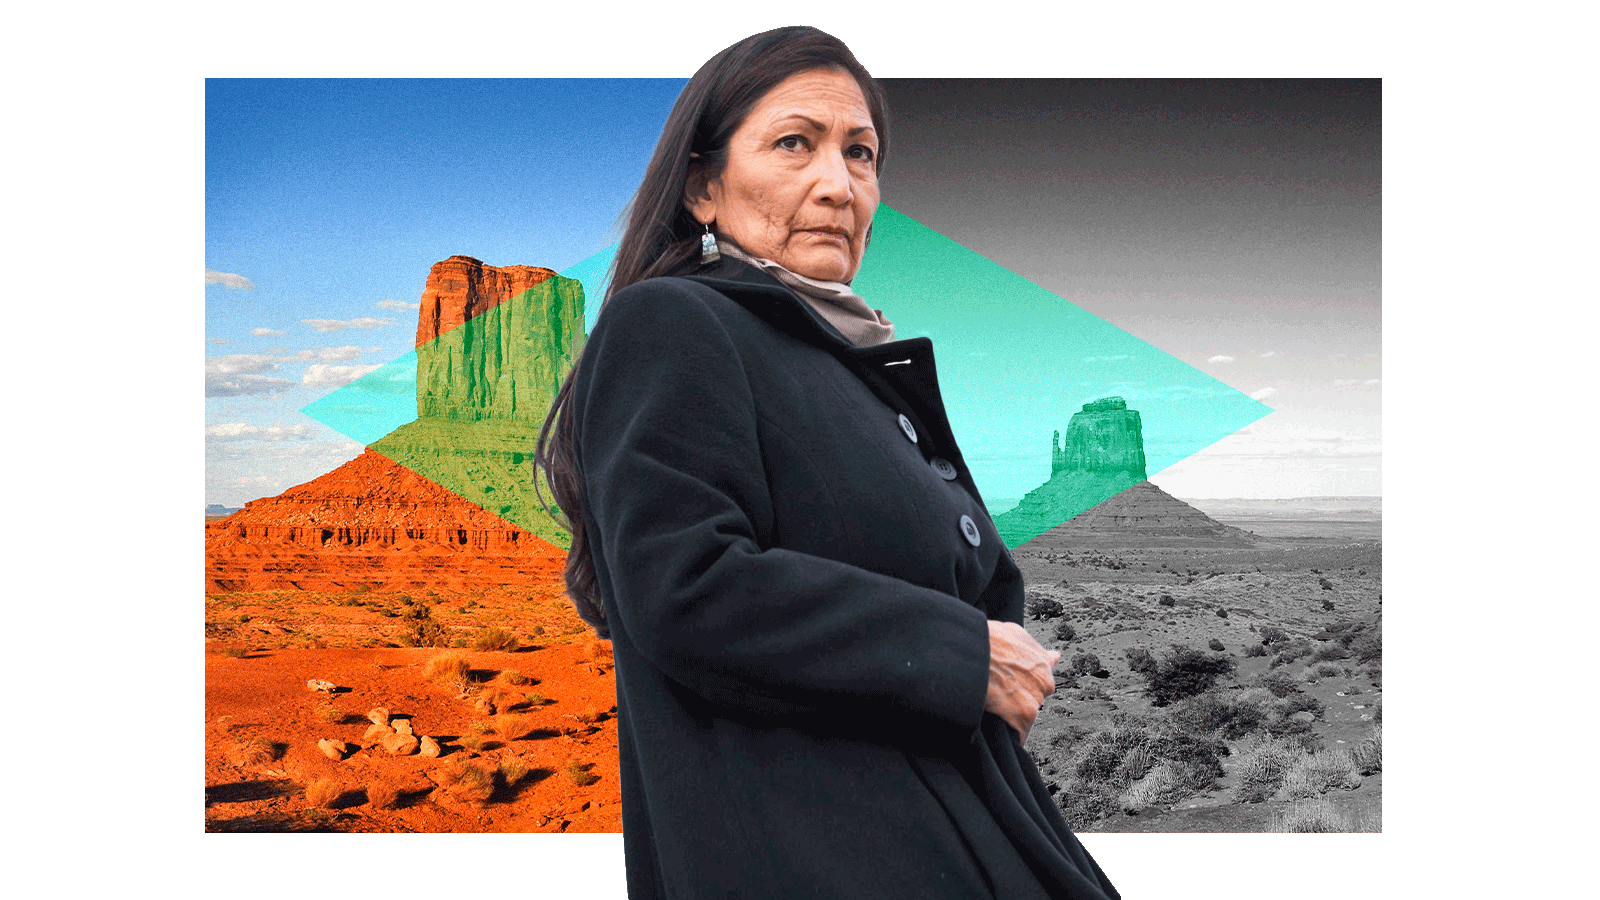 Deb Haaland against a background of the Navajo Nation